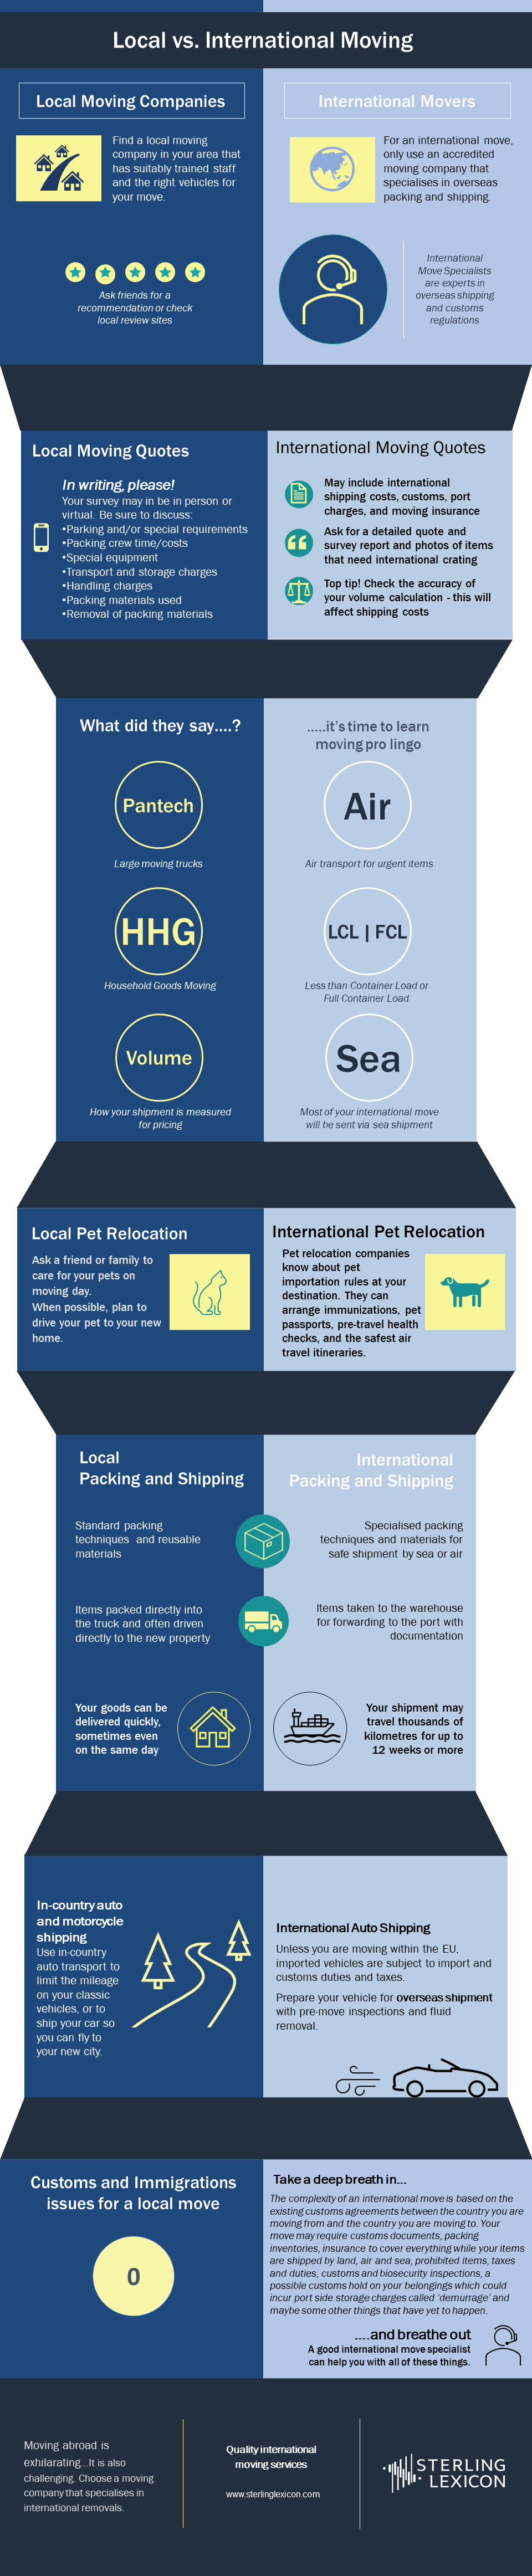 Moving house: Local vs International Moving [Infographic]